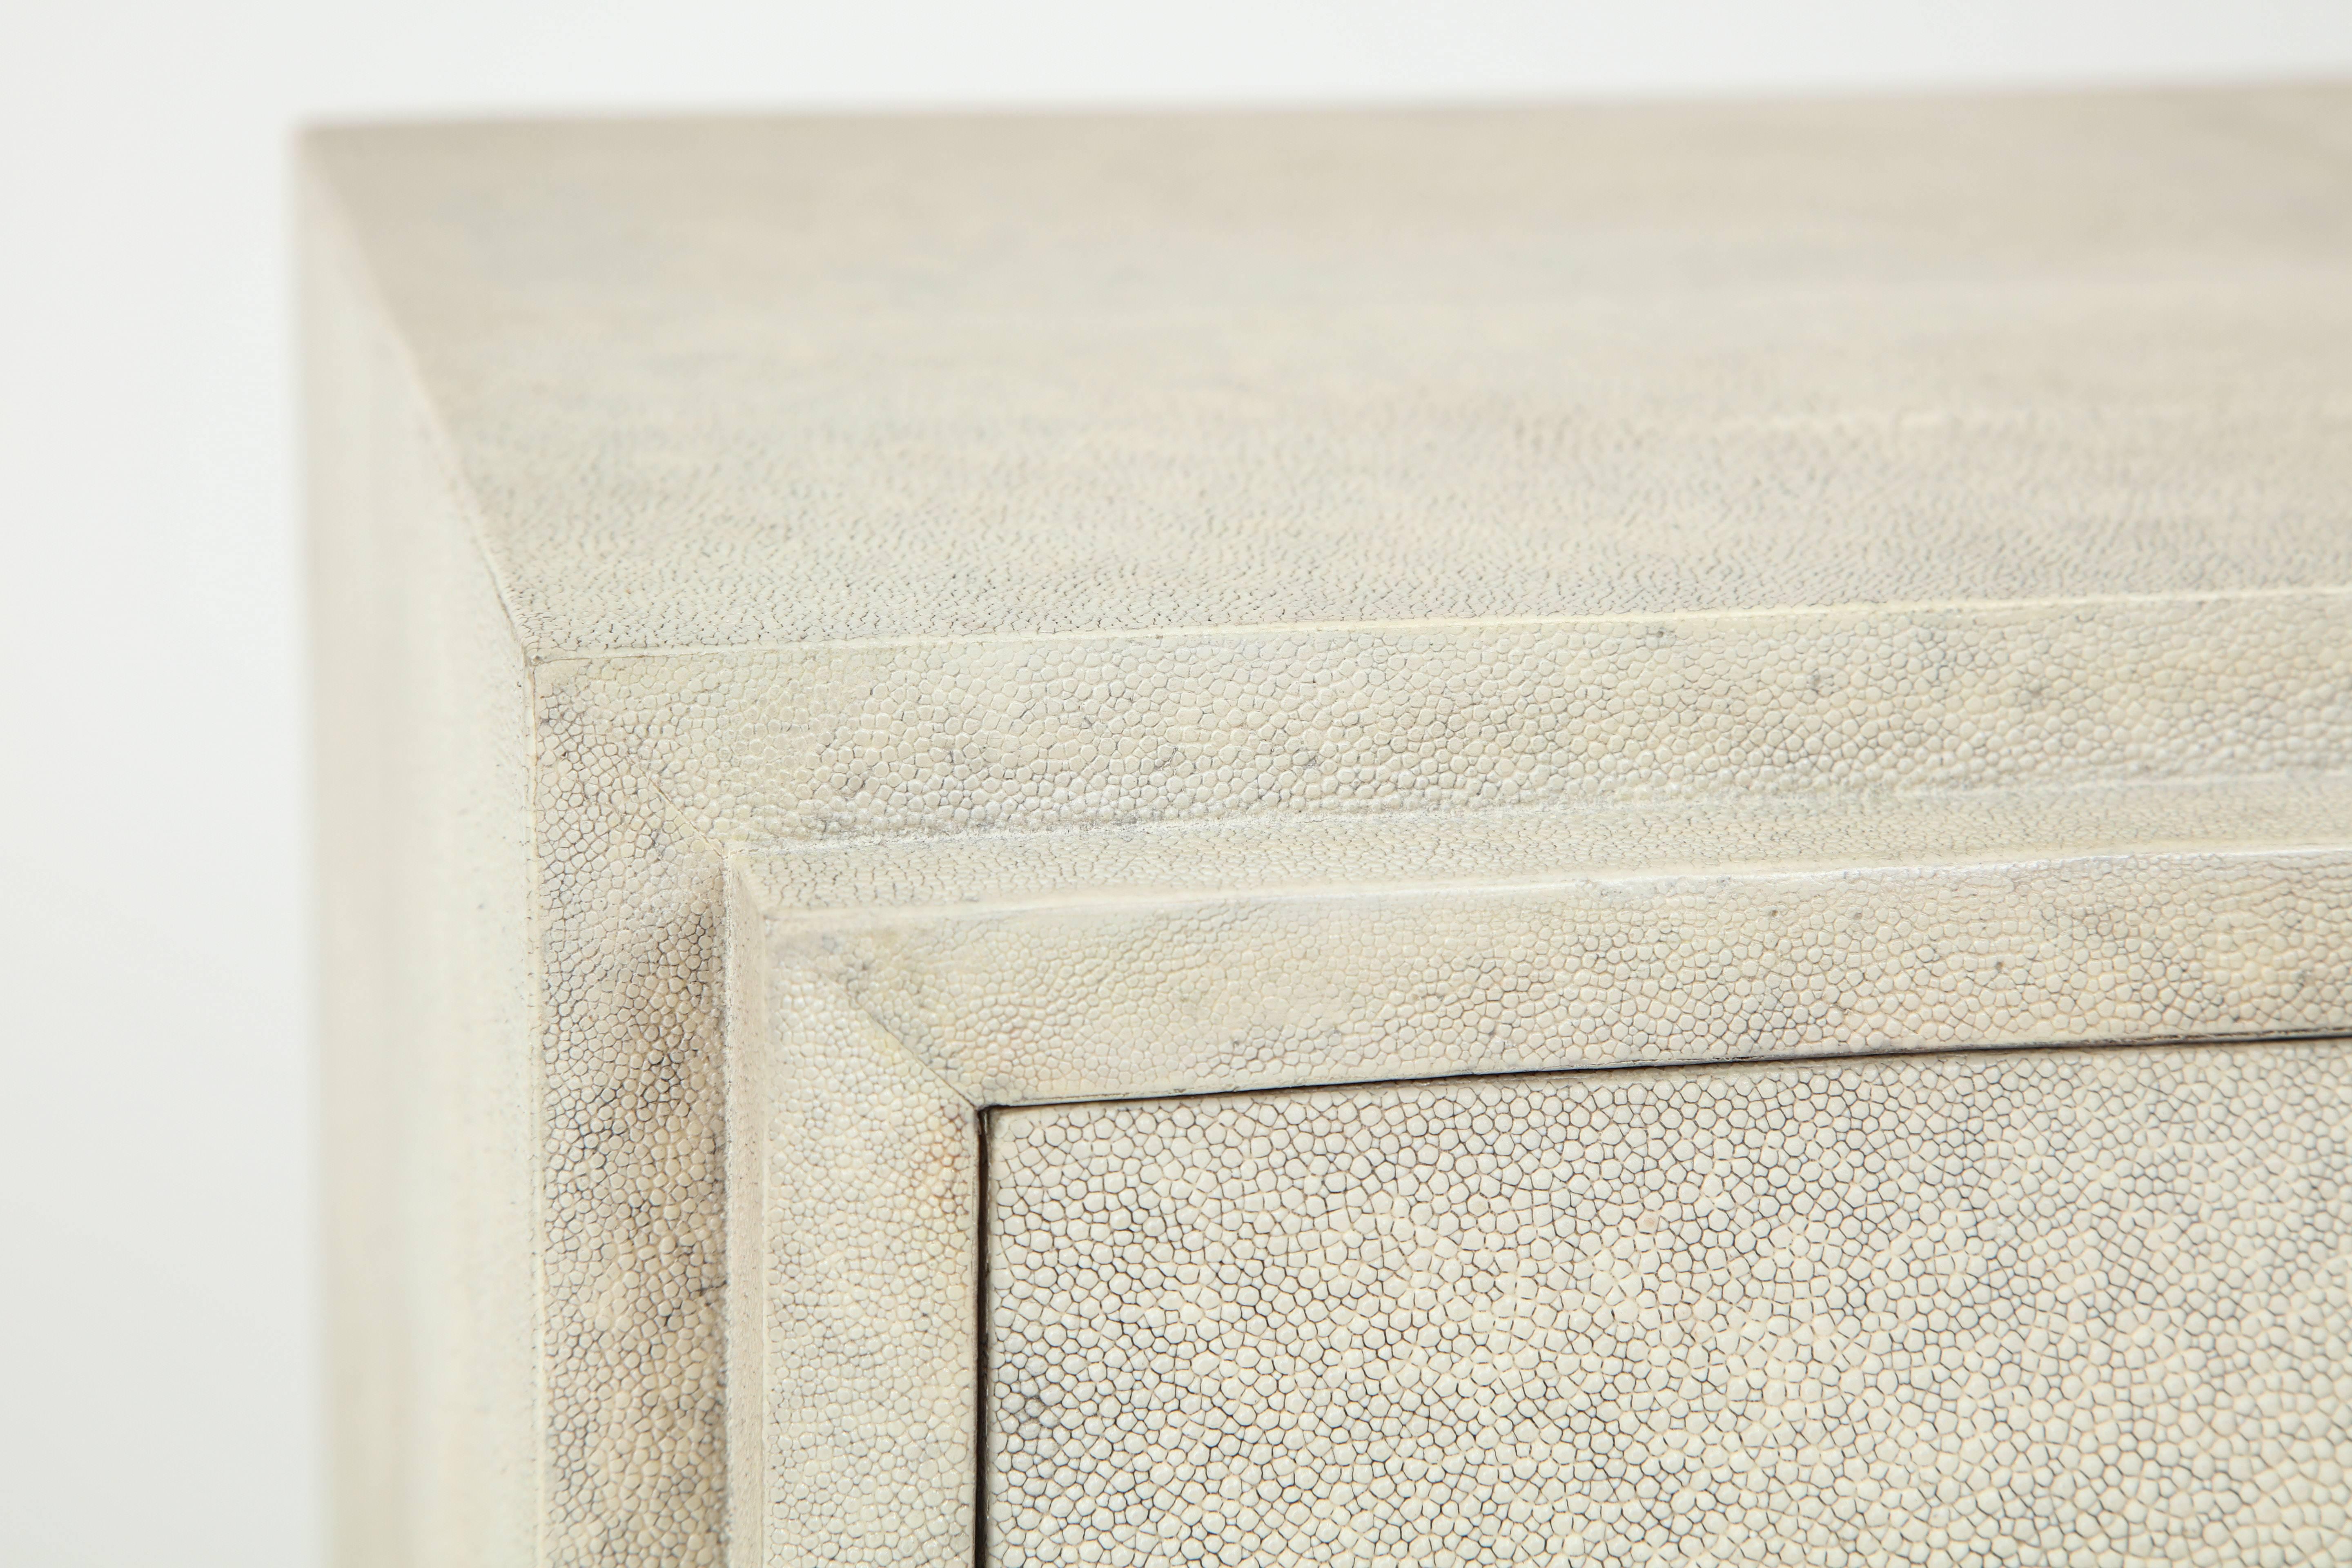 Art Deco Shagreen Side Tables or Nightstands, Designed In France, Cream Colored Shagreen